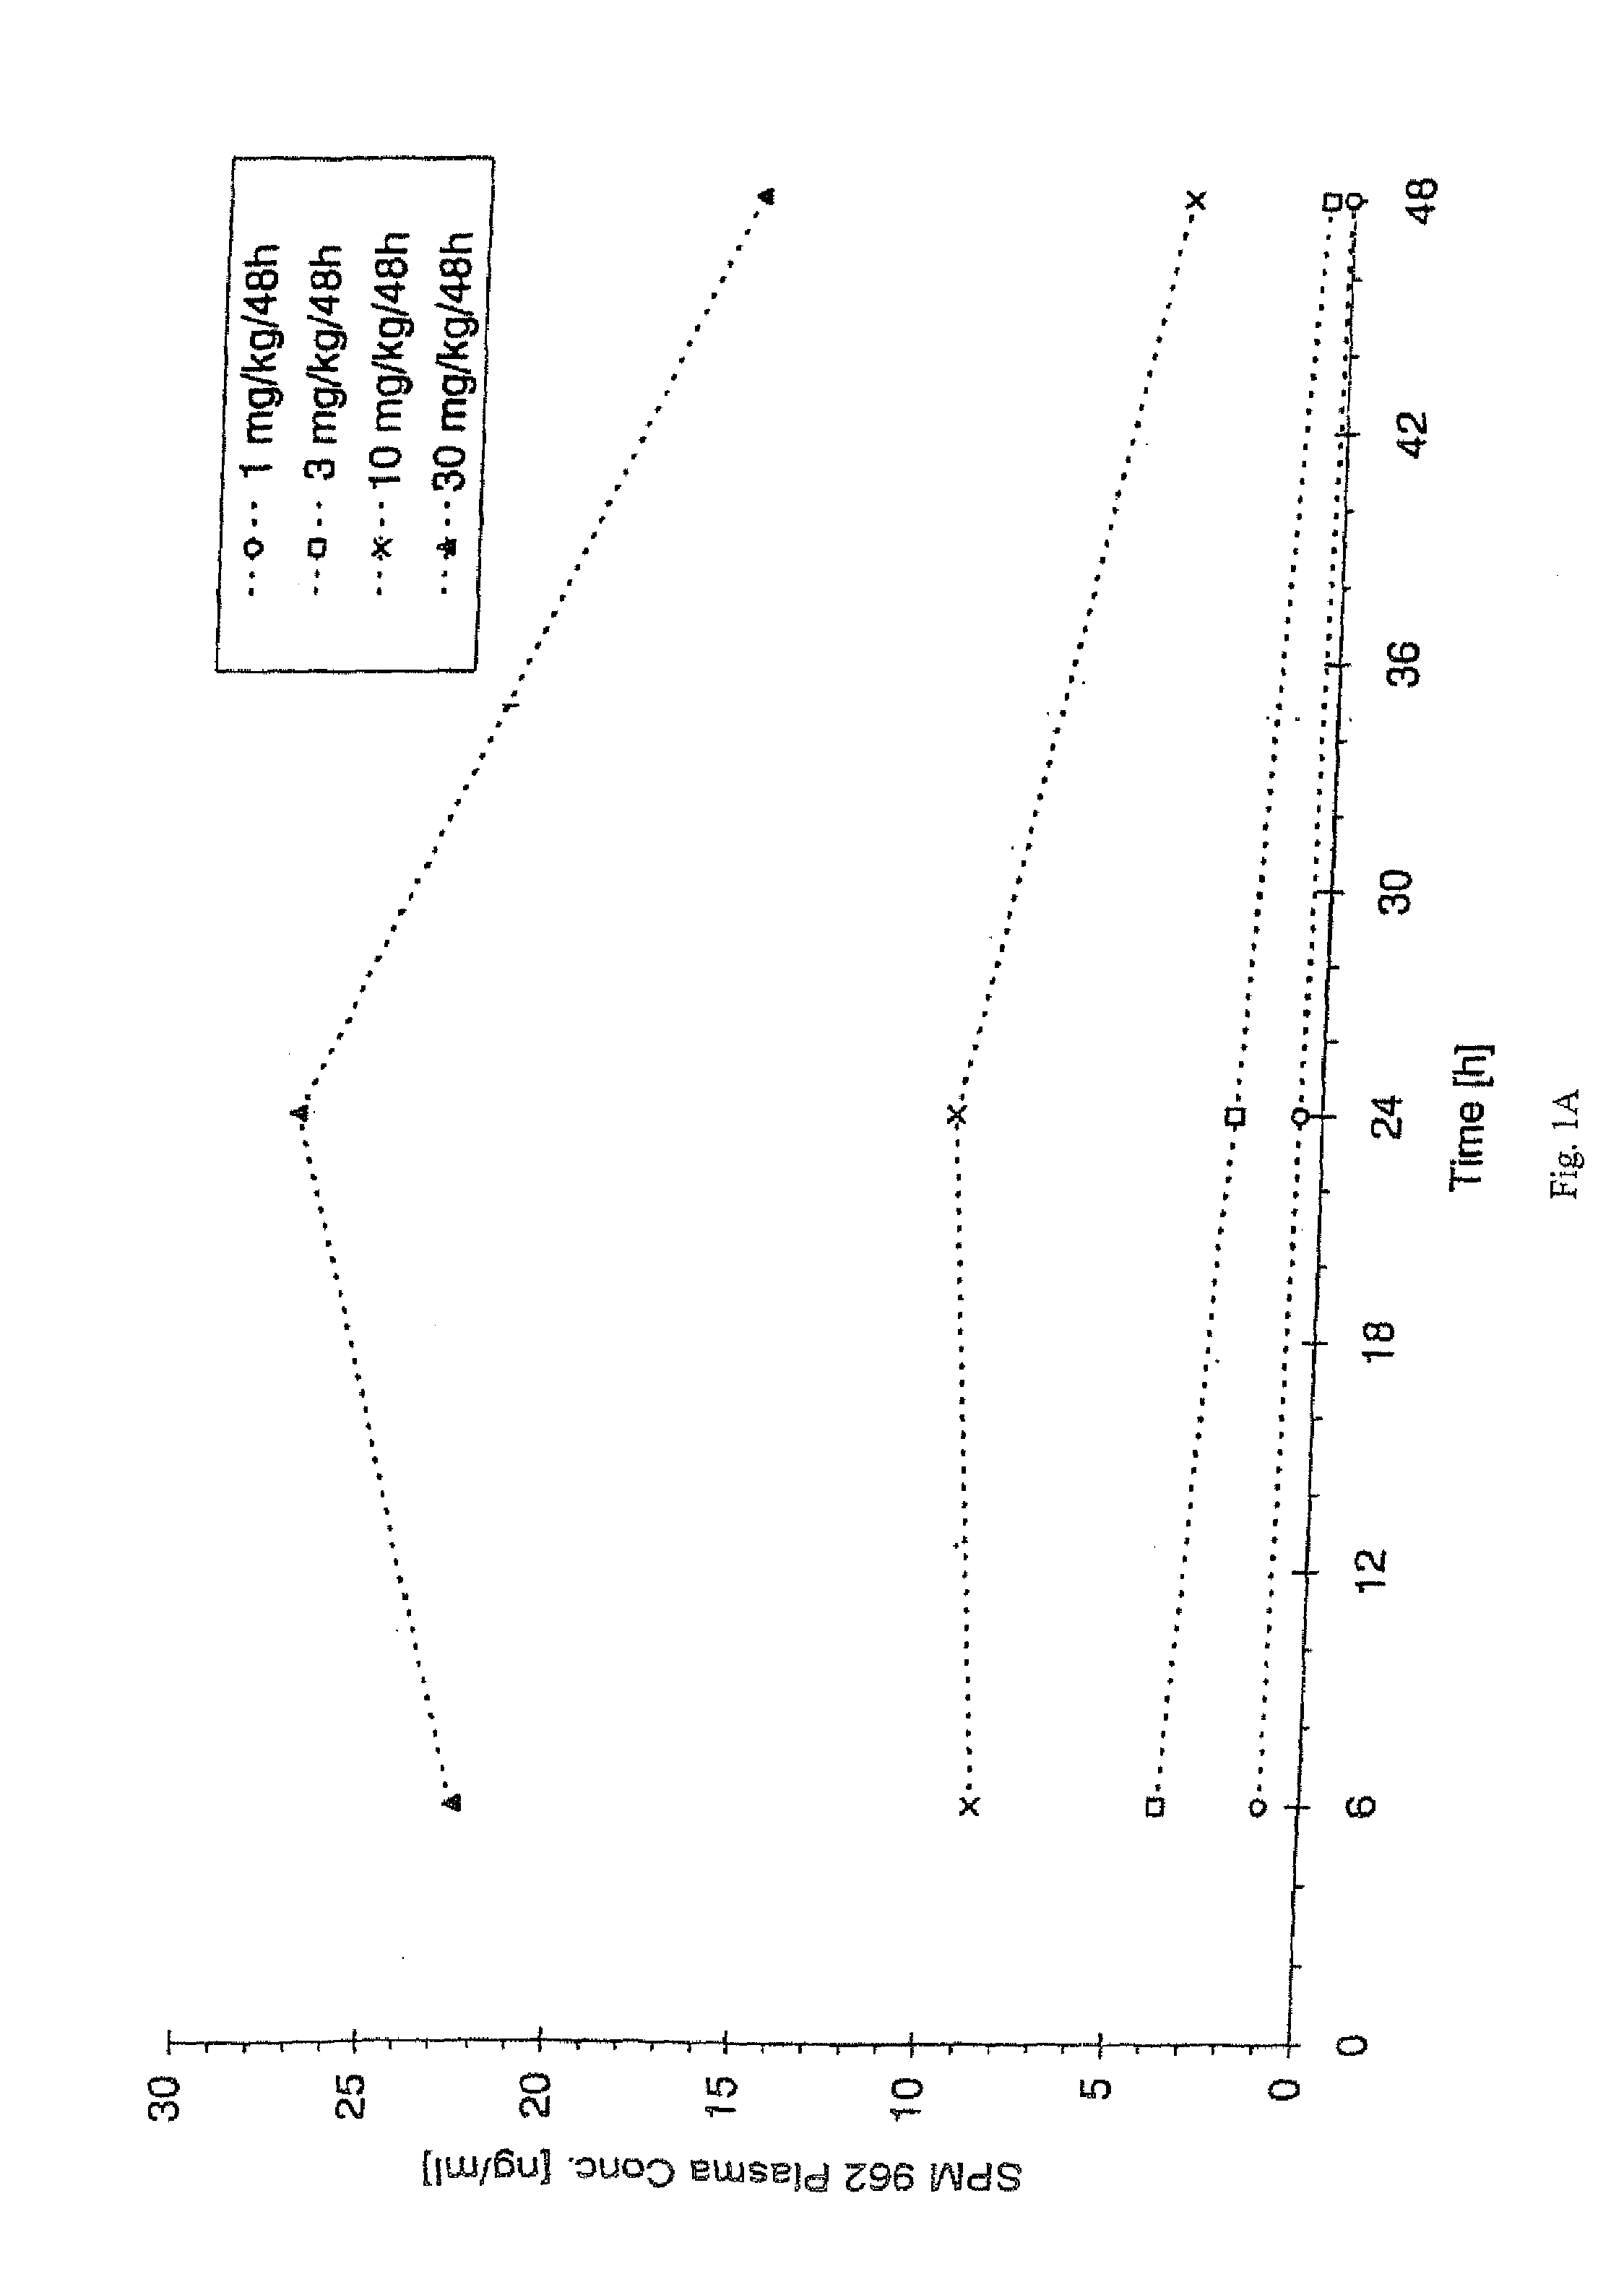 Injectable pharmaceutical composition for systematic administration of pharmacologically active ingredients